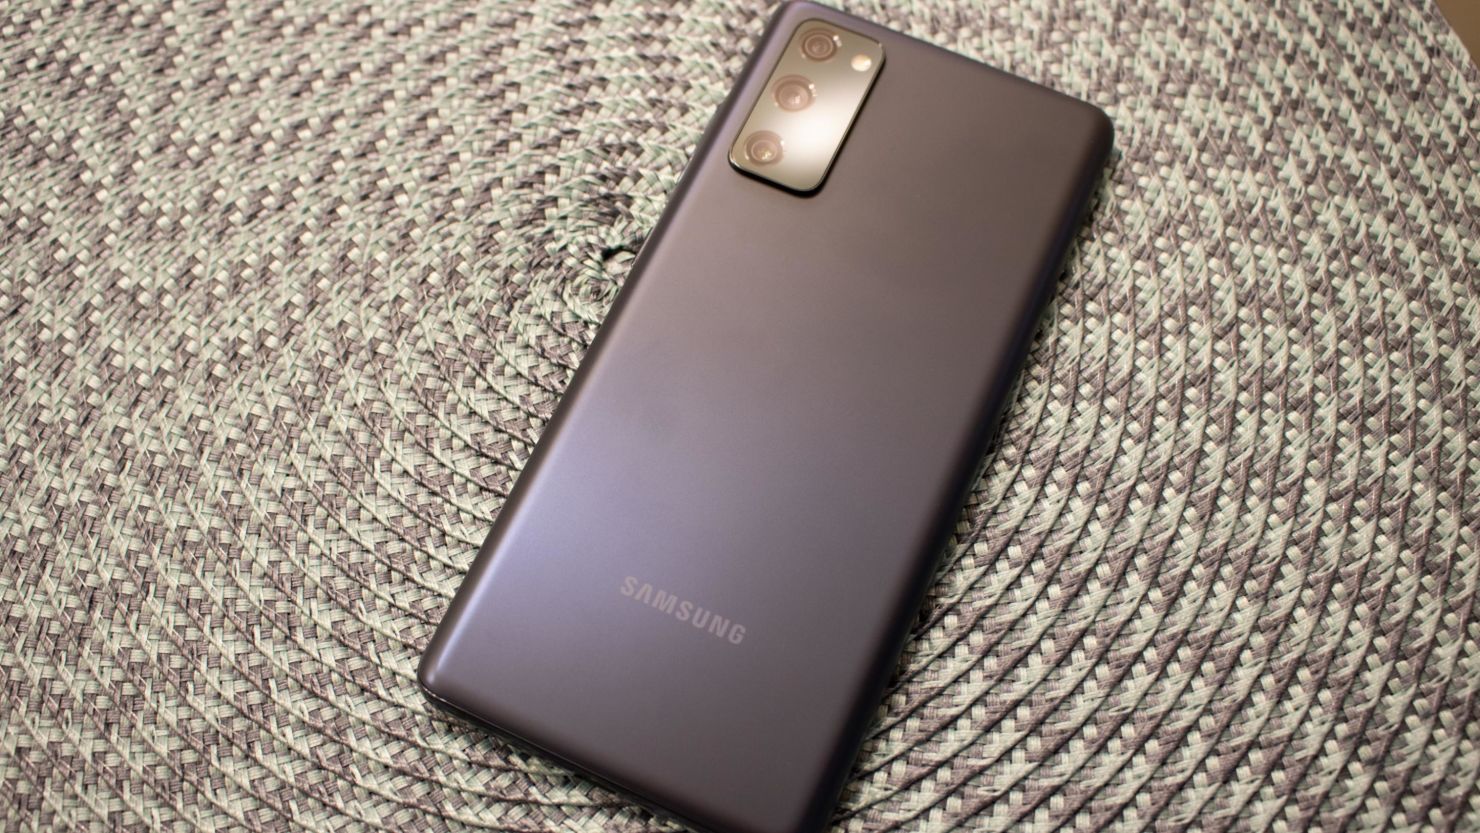 Samsung S20 FE Battery Life: A Quick Overview